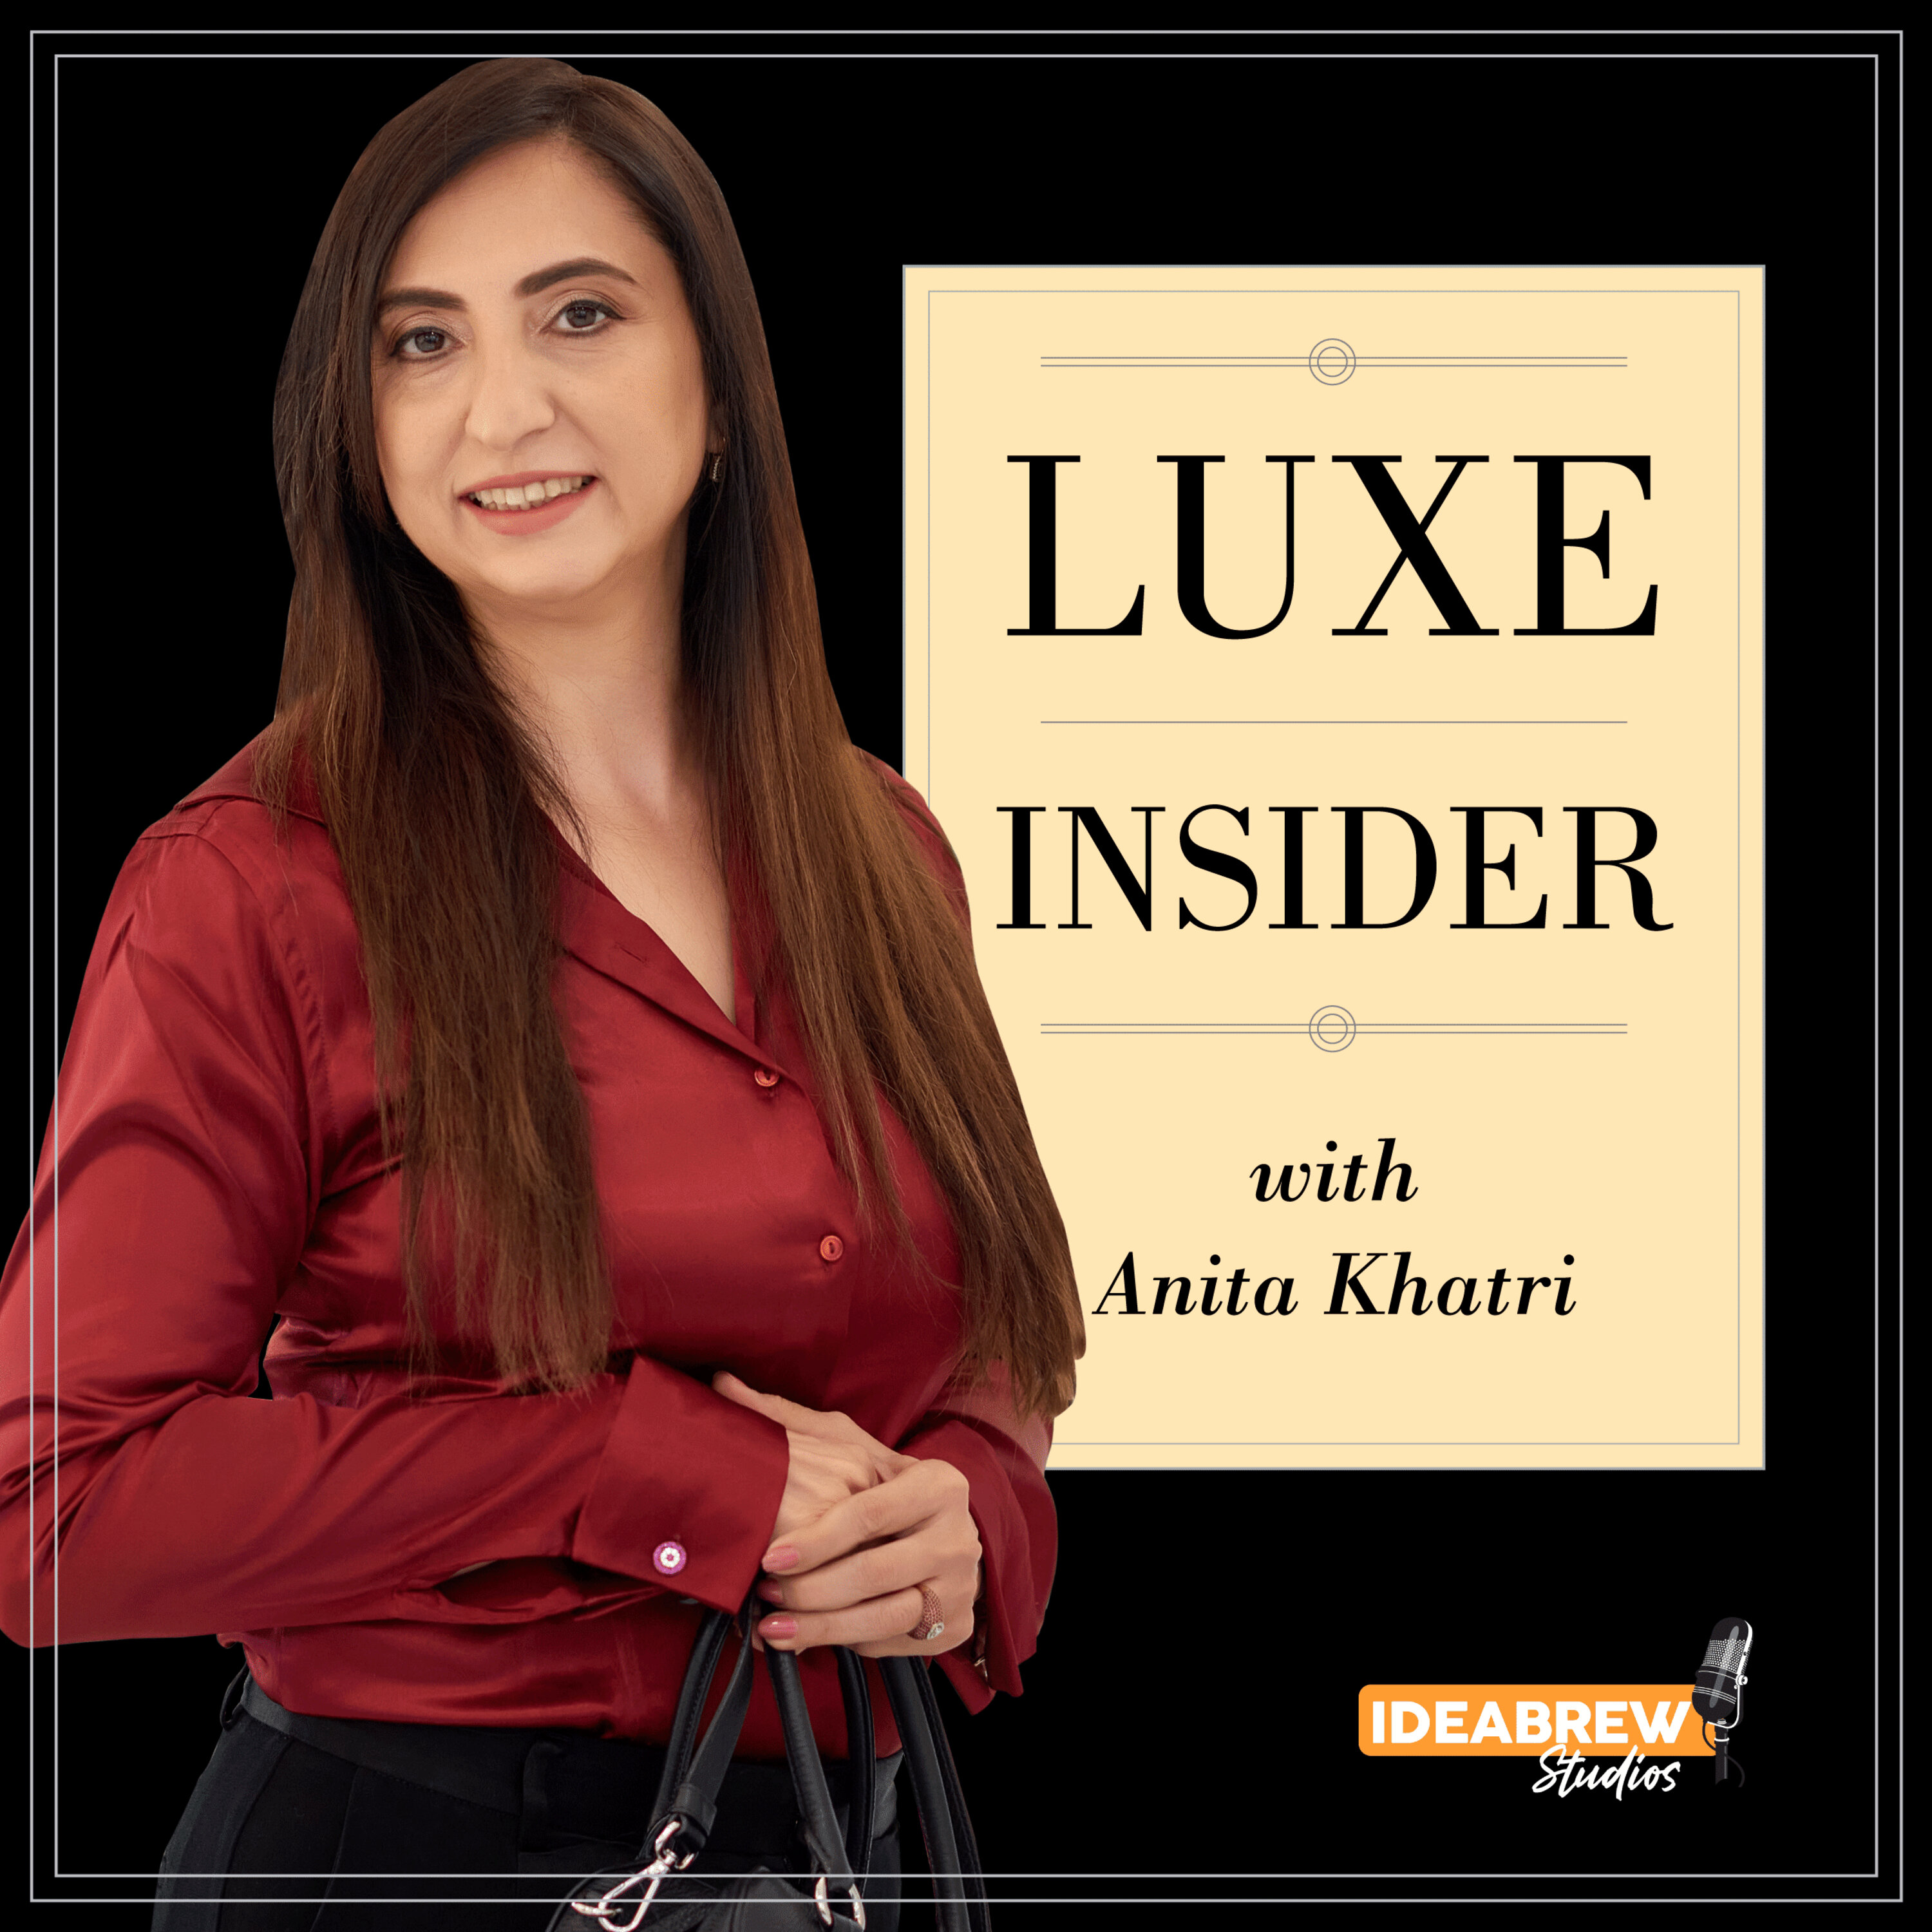 Welcome to your Luxe Insider!